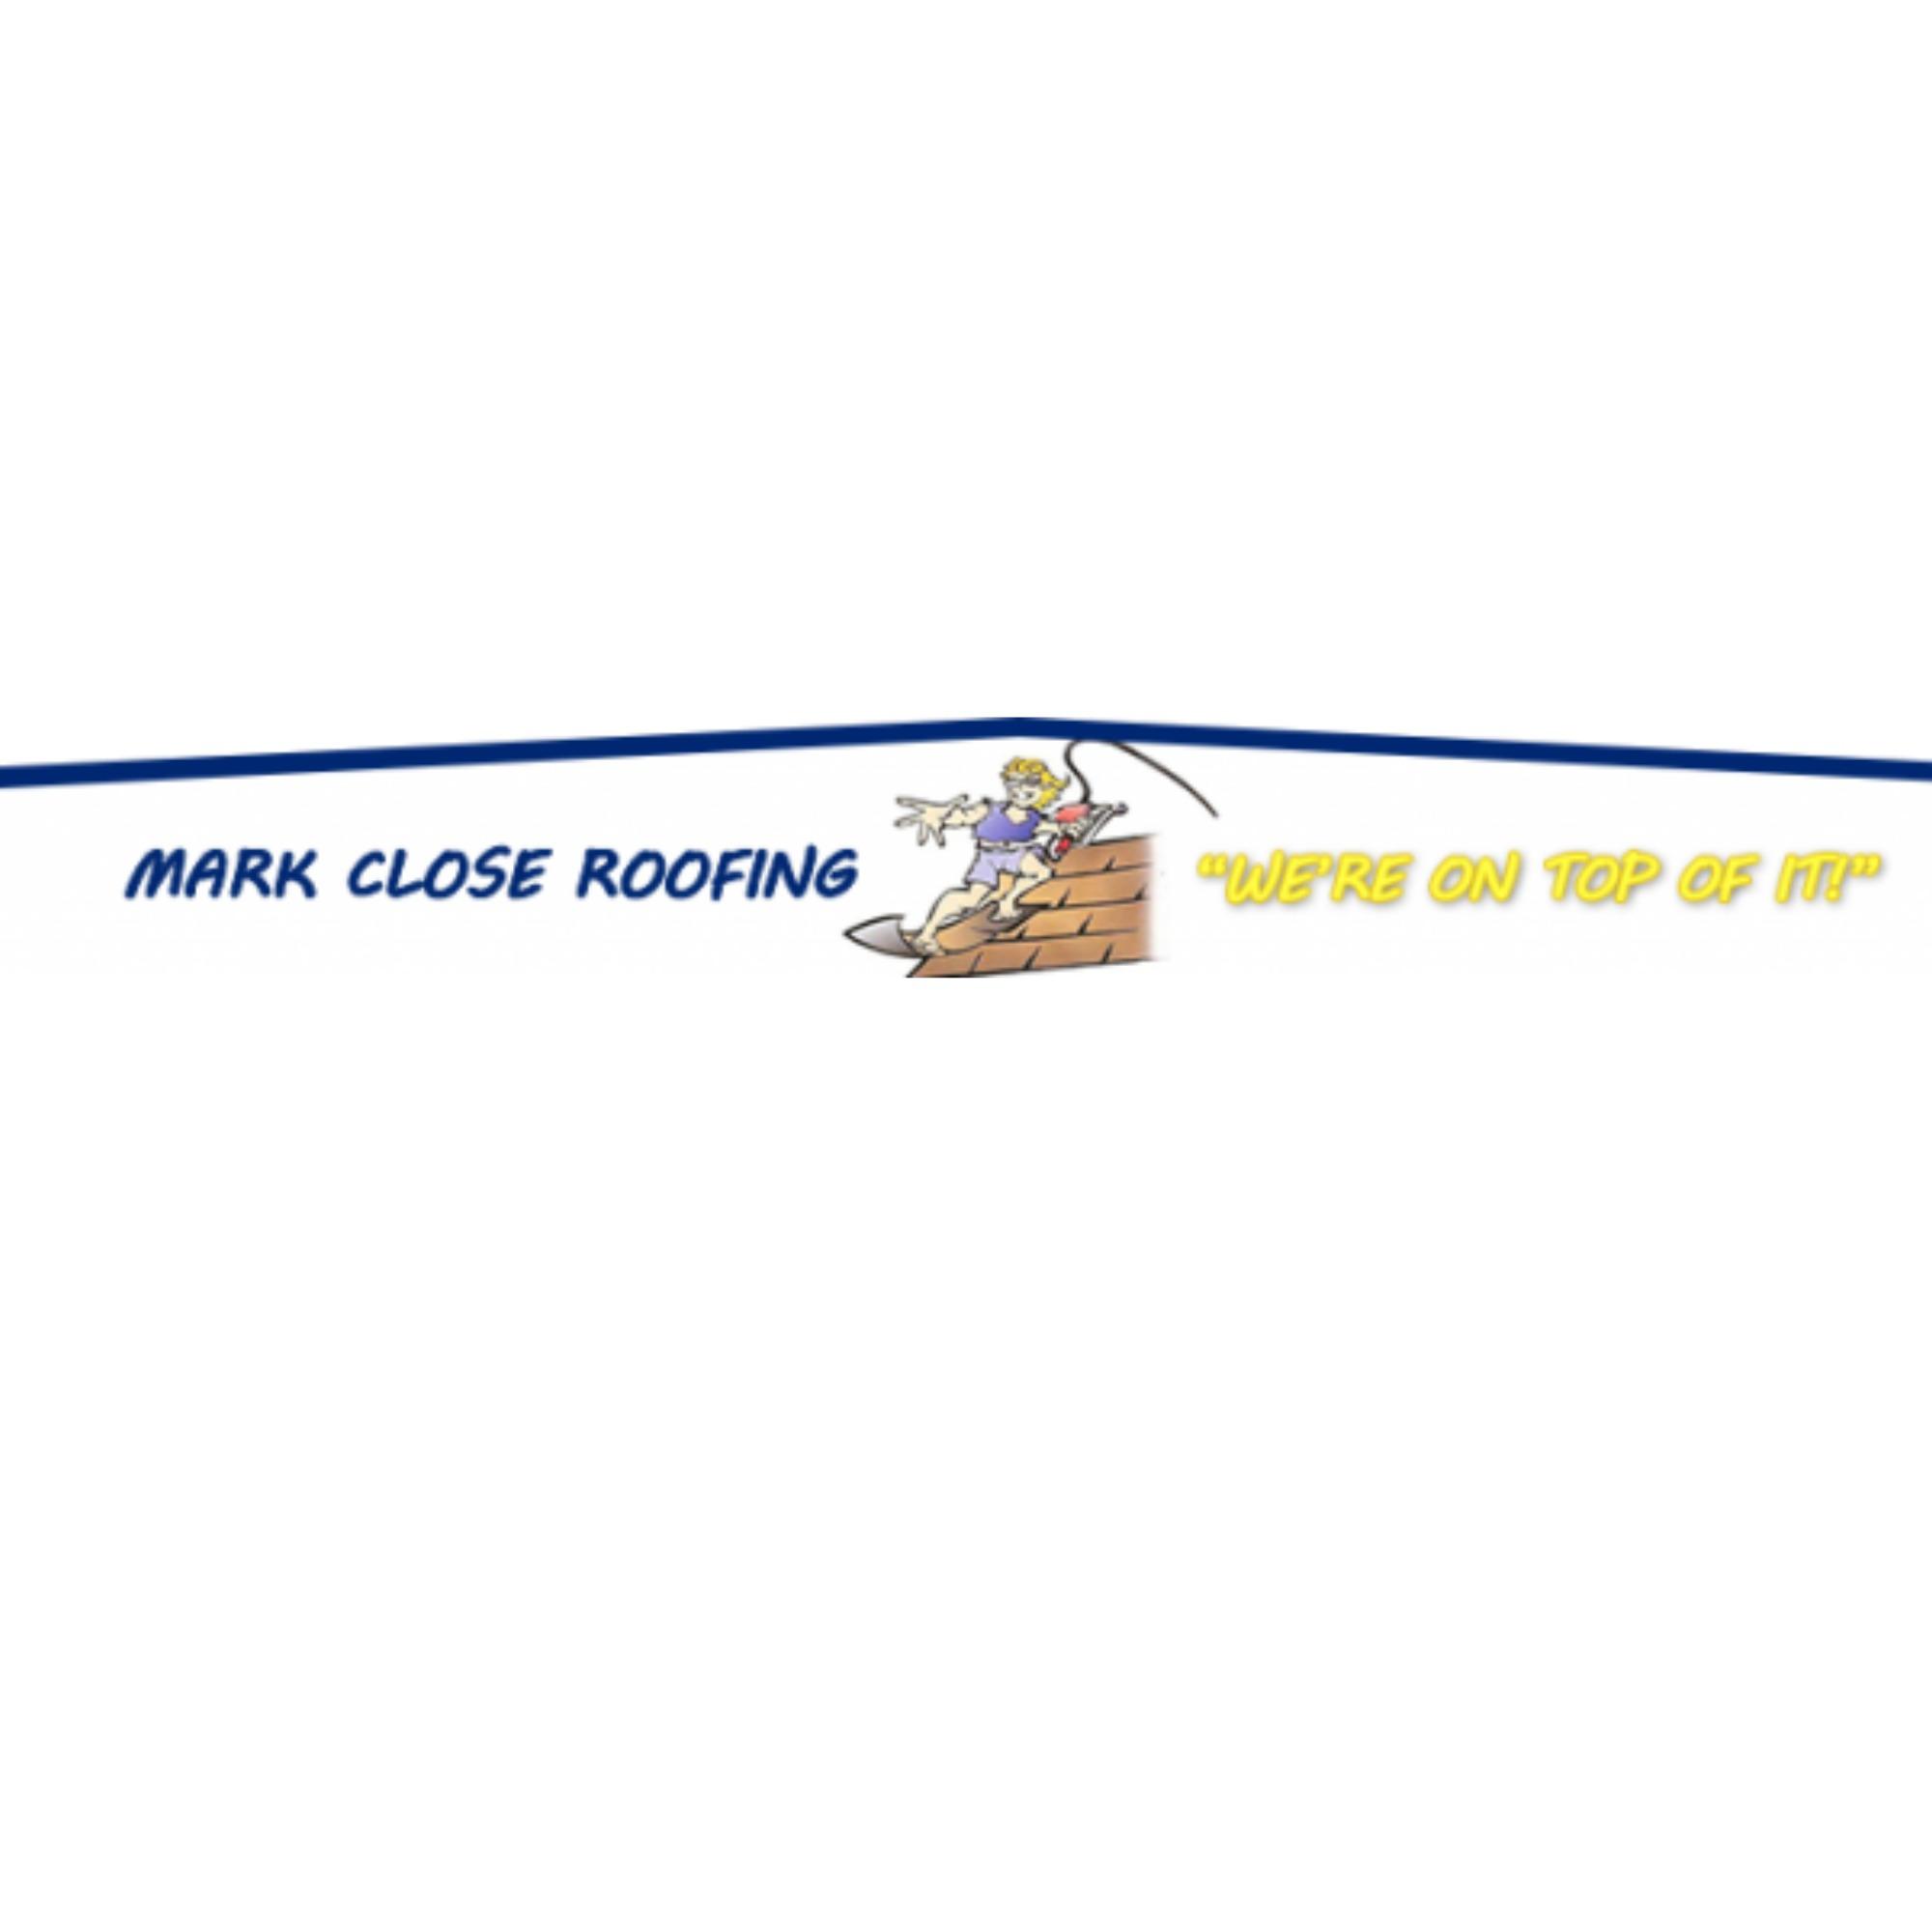 Mark Close Roofing